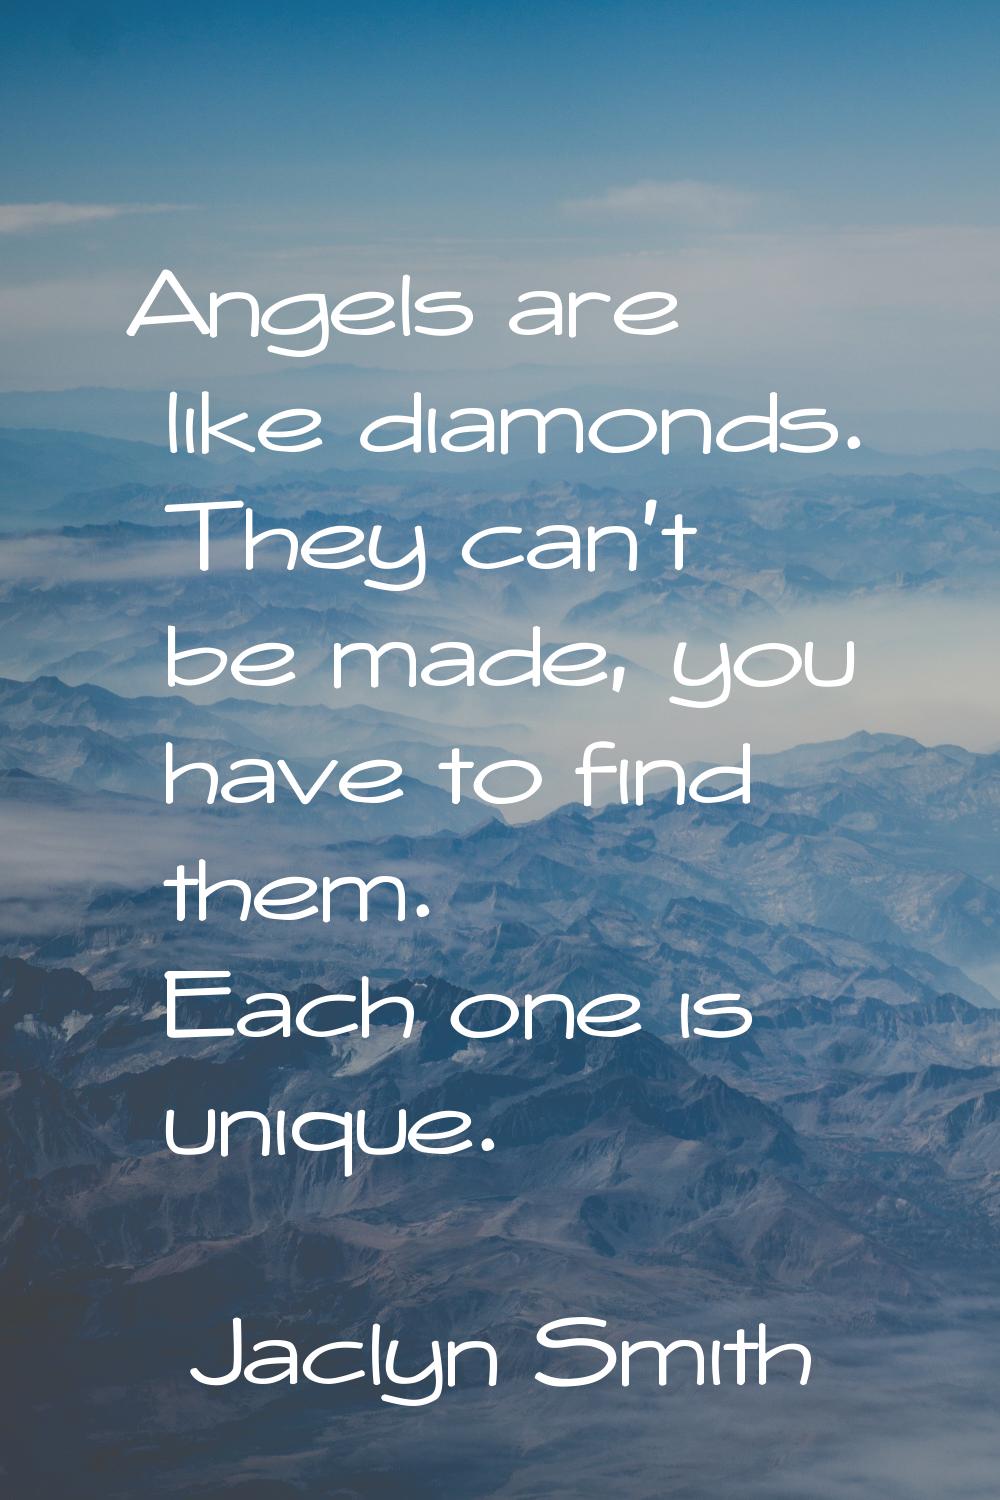 Angels are like diamonds. They can't be made, you have to find them. Each one is unique.